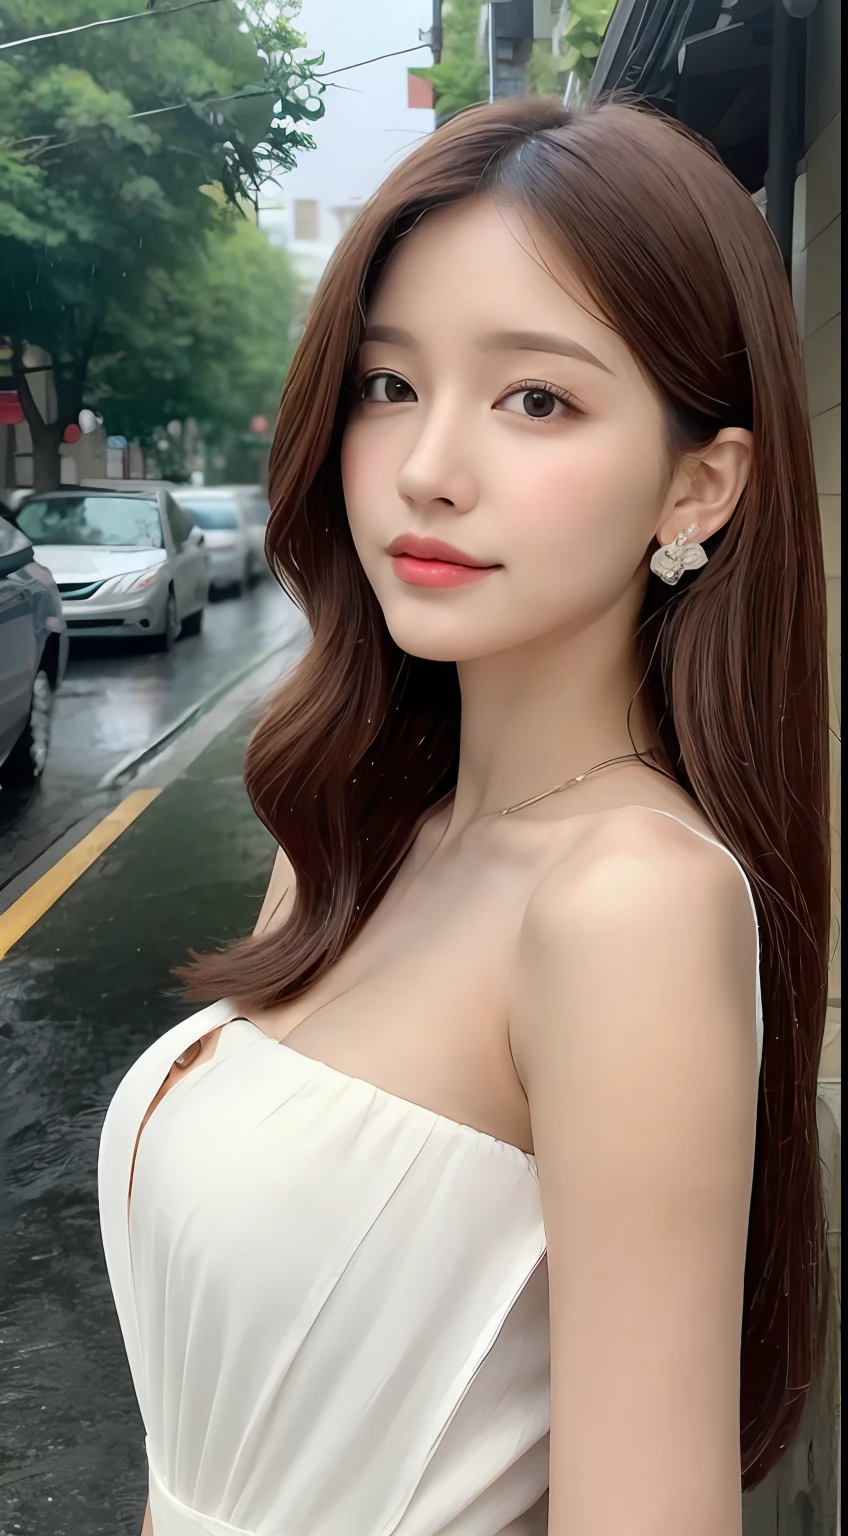 ((Best Quality, 8k, Masterpiece: 1.3)), Focus: 1.2, Perfect Body Beauty: 1.4, Buttocks: 1.2, ((Layered Haircut, Flat Chest: 1.2)), (Rain, Street:1.3), Bandeau Dress: 1.1, Highly Detailed Face and Skin Texture, Fine Eyes, Double Eyelids, Whitened Skin, Long Hair, (Shut Up: 1.3), Full Body